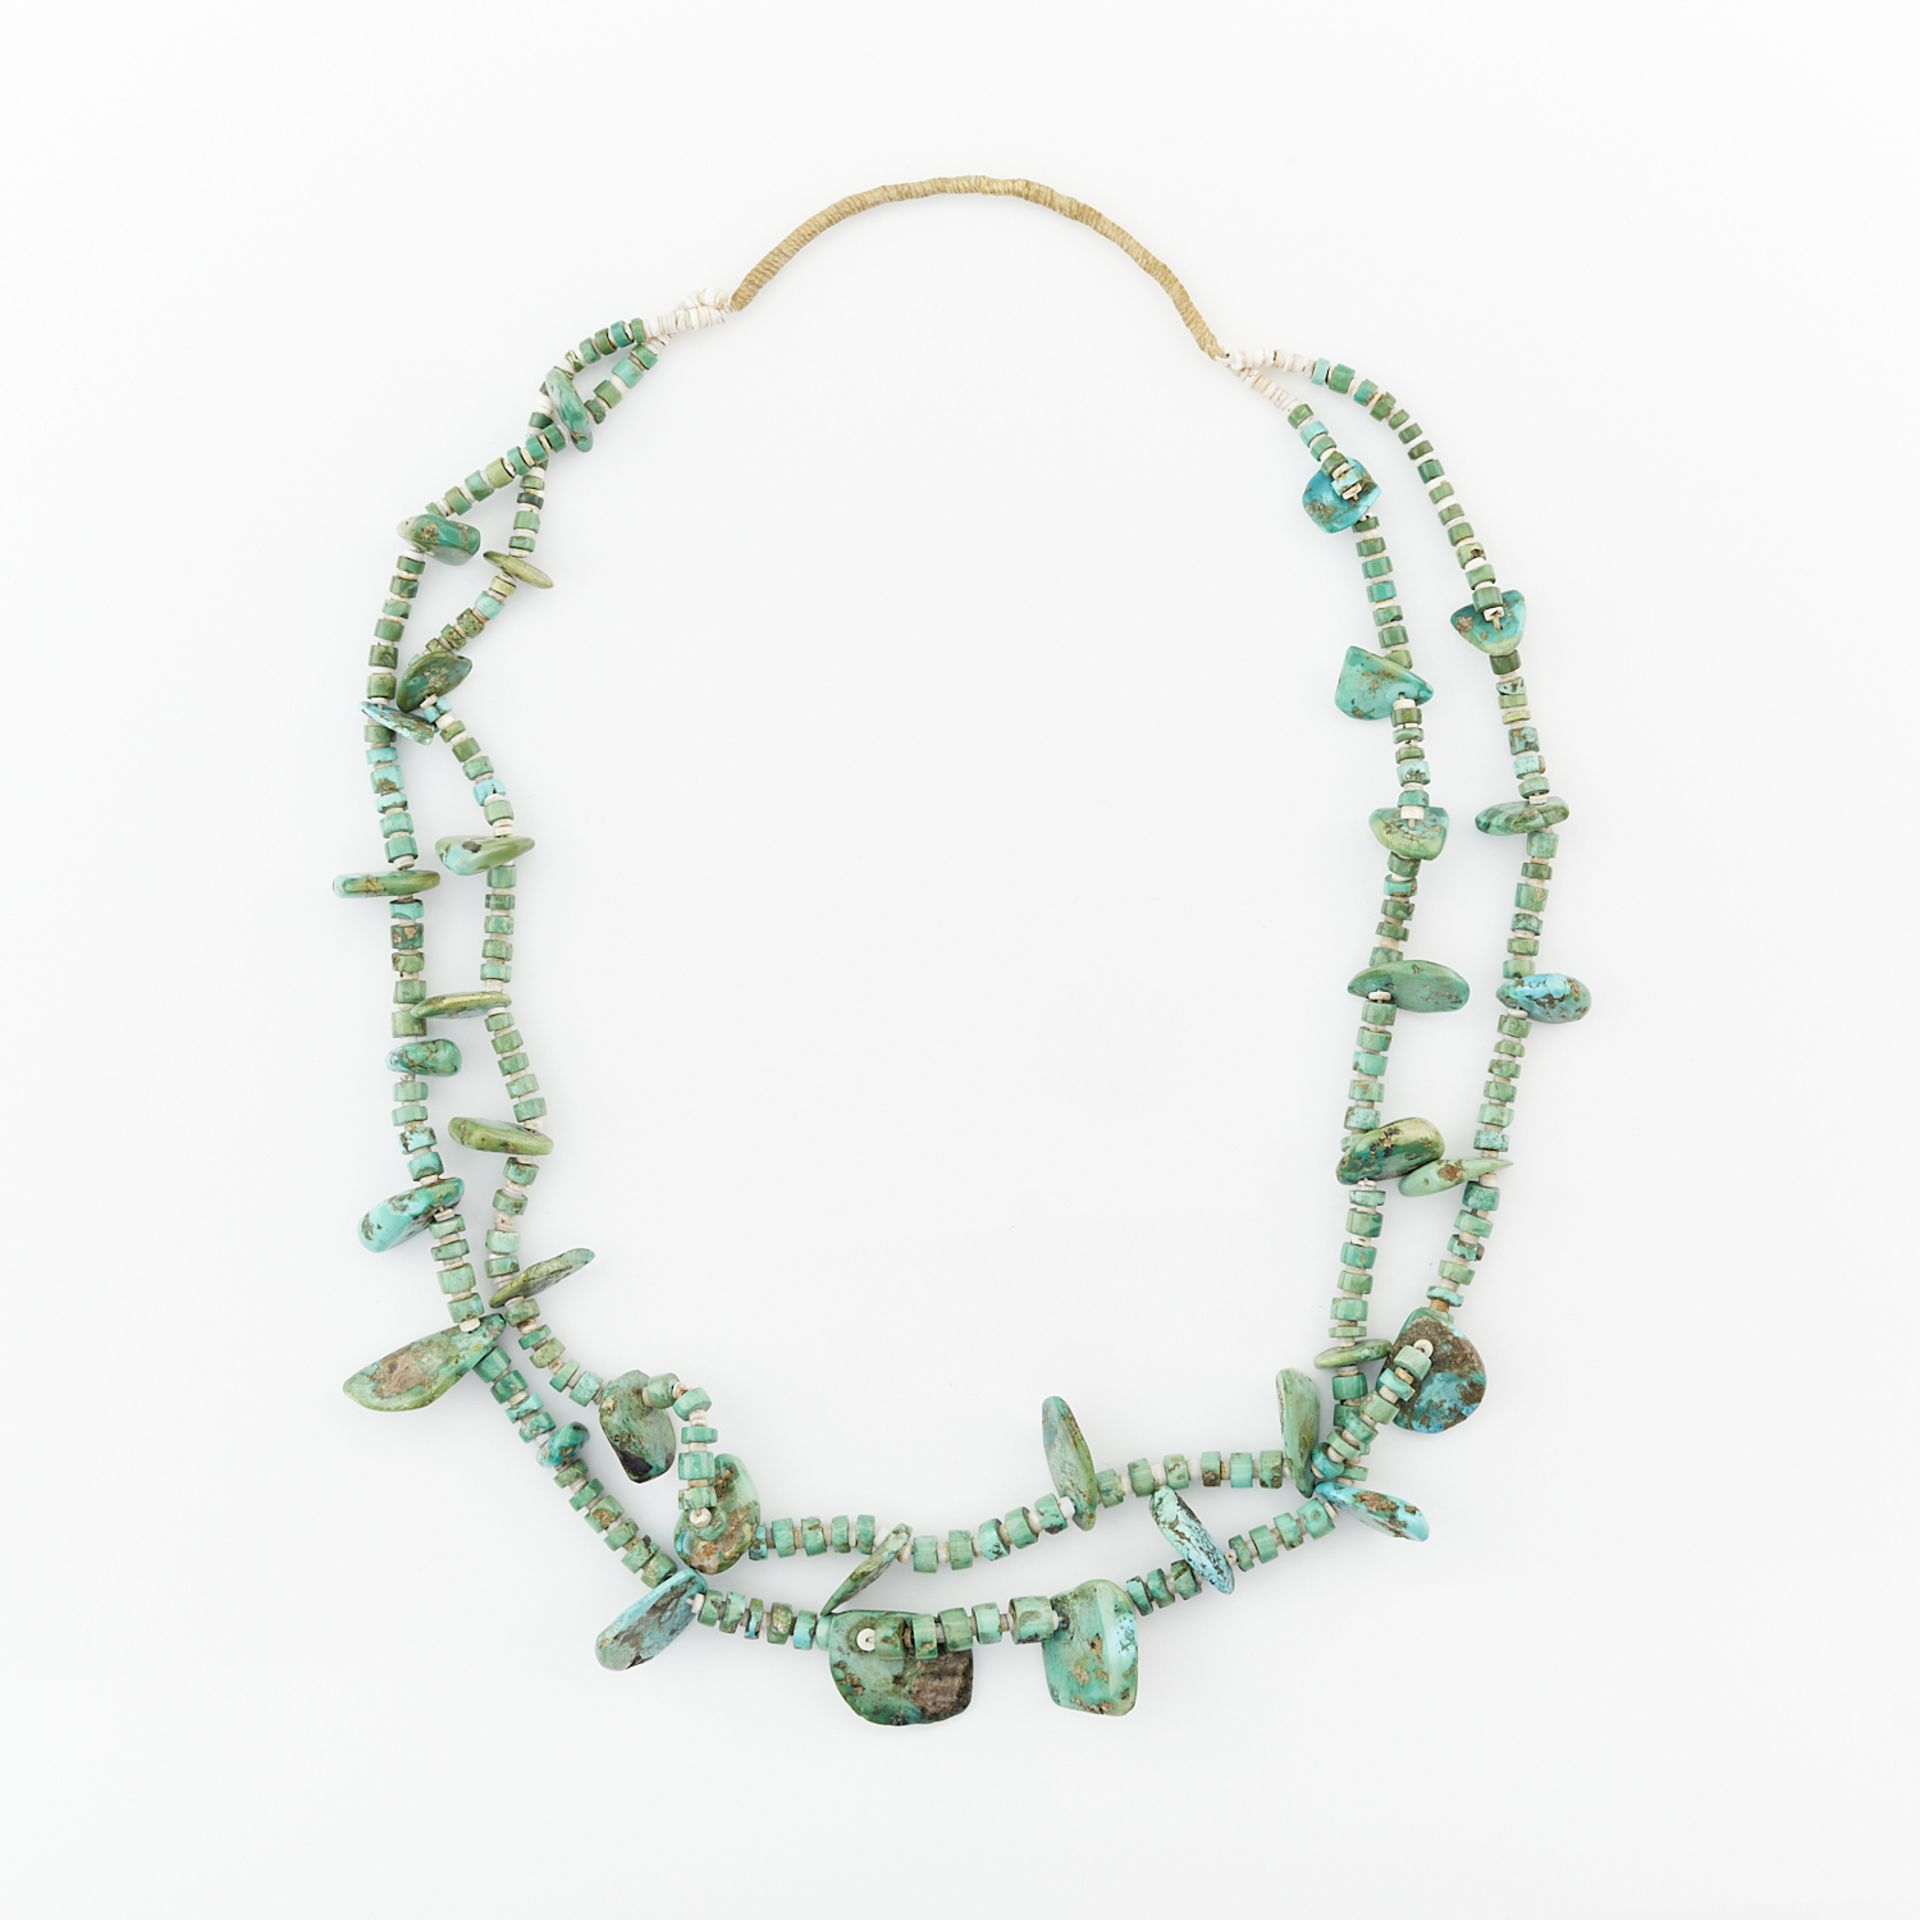 Two Strand Turquoise Heishi Necklace - Image 4 of 6